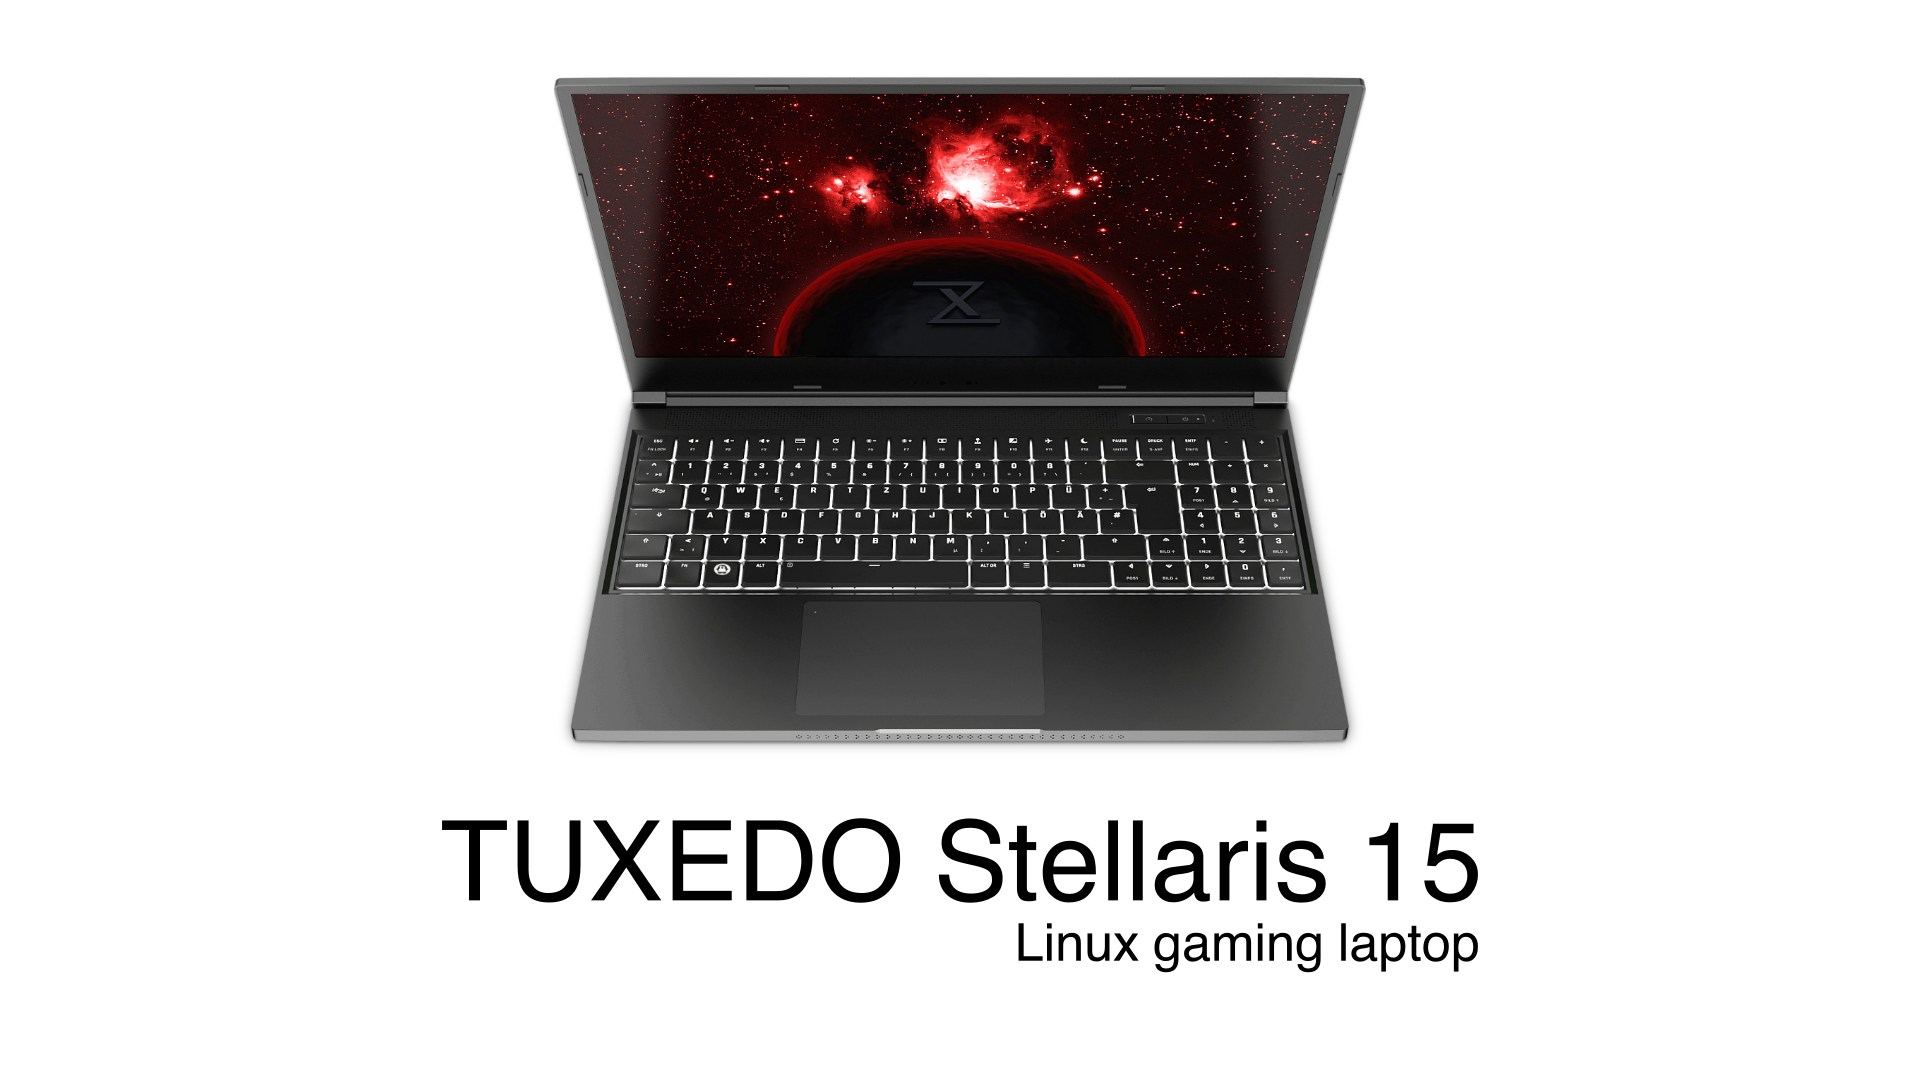 TUXEDO Stellaris 15 Linux Gaming Laptop Launches with AMD Ryzen 9, NVIDIA RTX 3080, and 3K Display